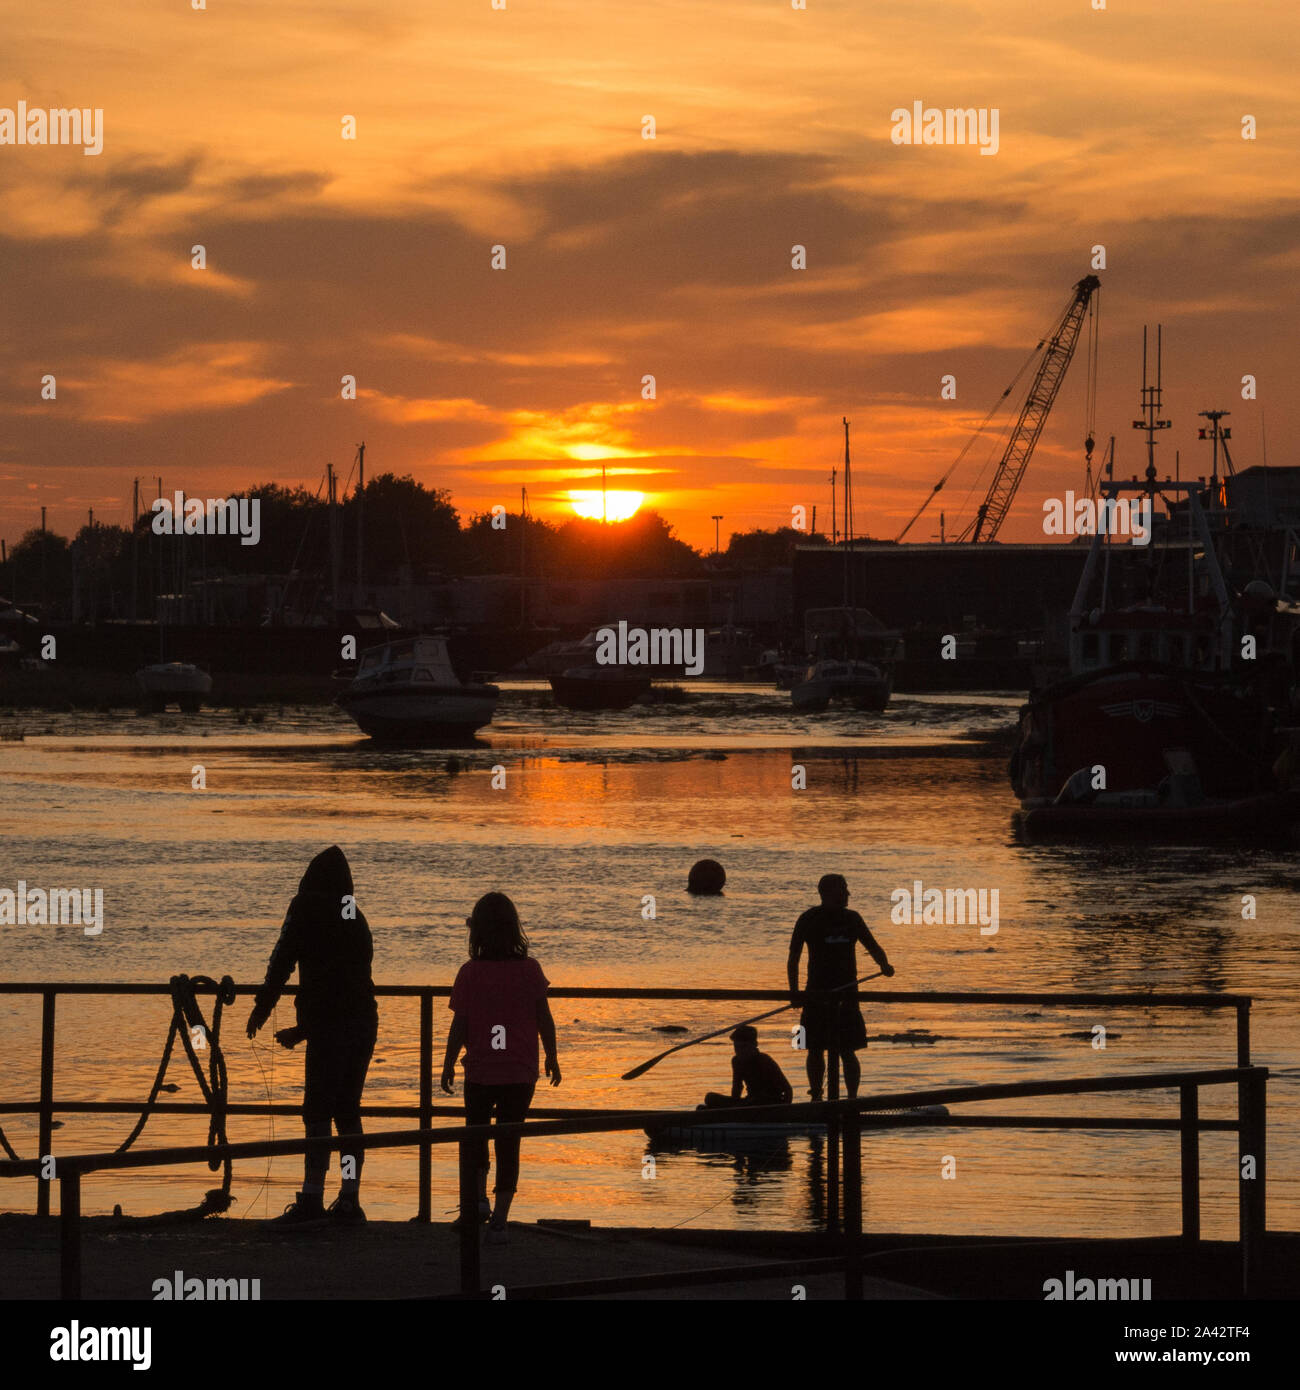 Young girls crabbing in the harbour at Leigh-On-Sea, silhouetted at sunset, as two paddle boarders set off. Stock Photo